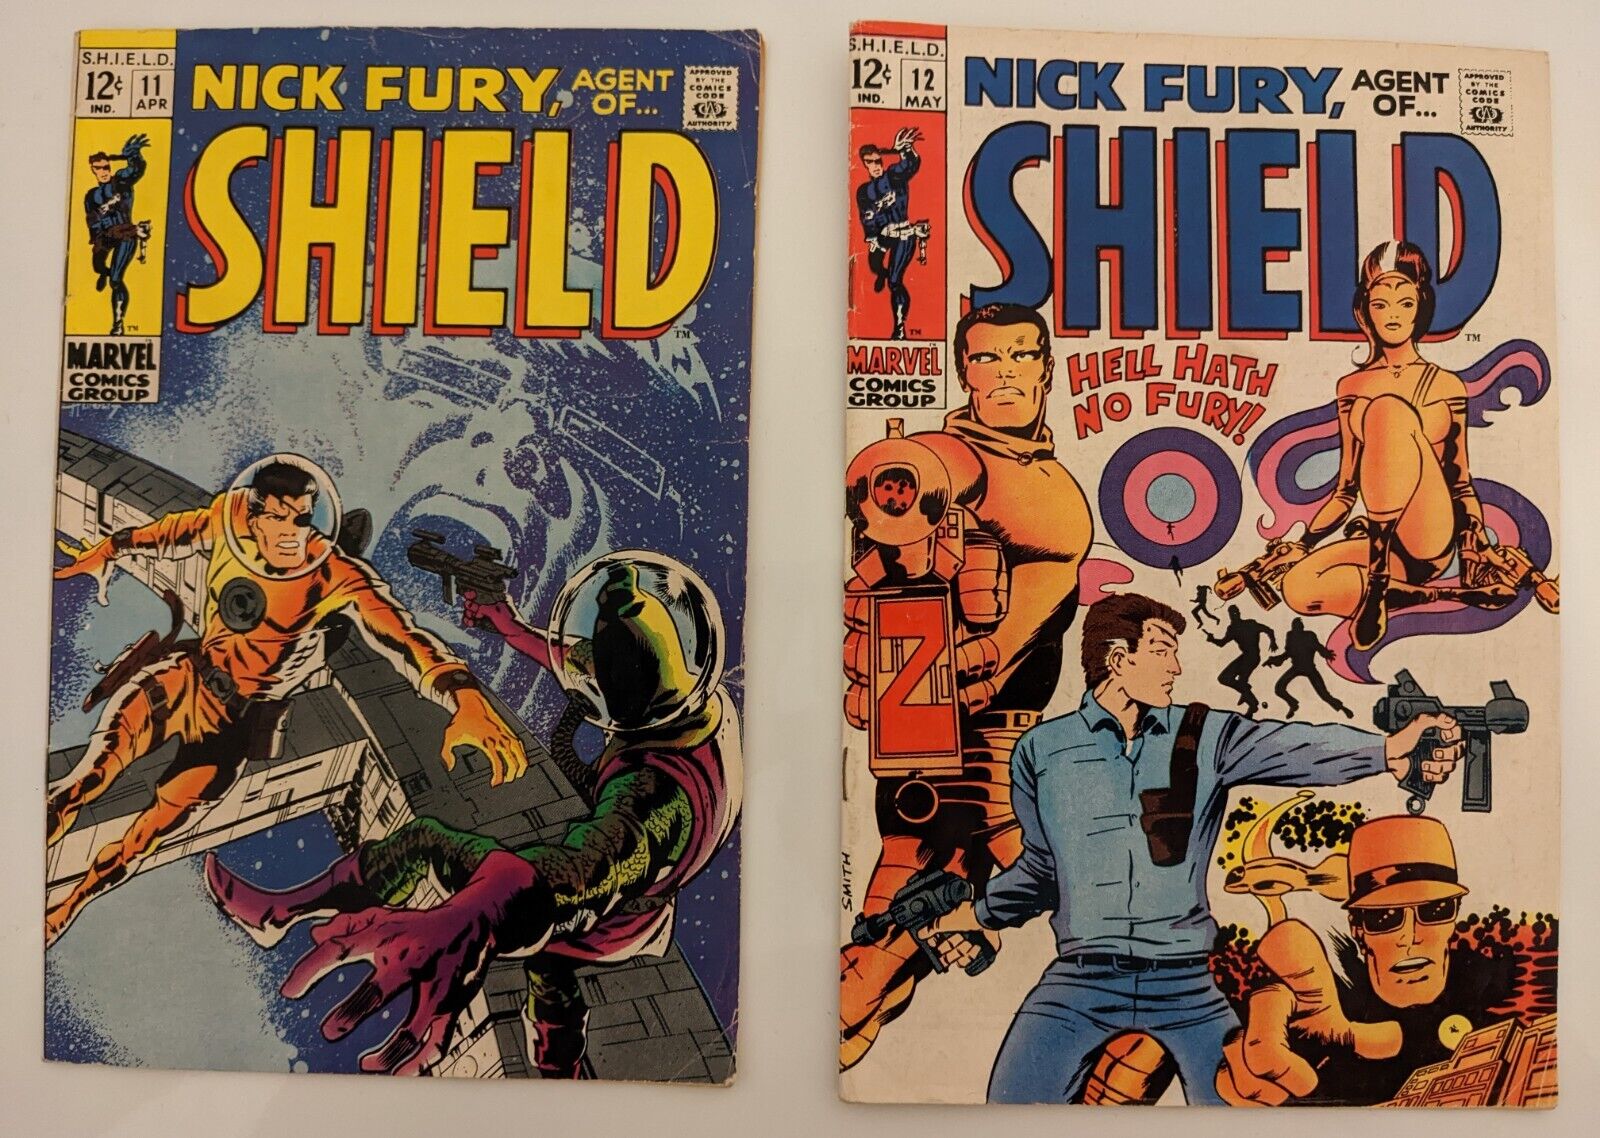 NICK FURY AGENT OF SHIELD S.H.I.E.L.D.  #11 and #12 1969